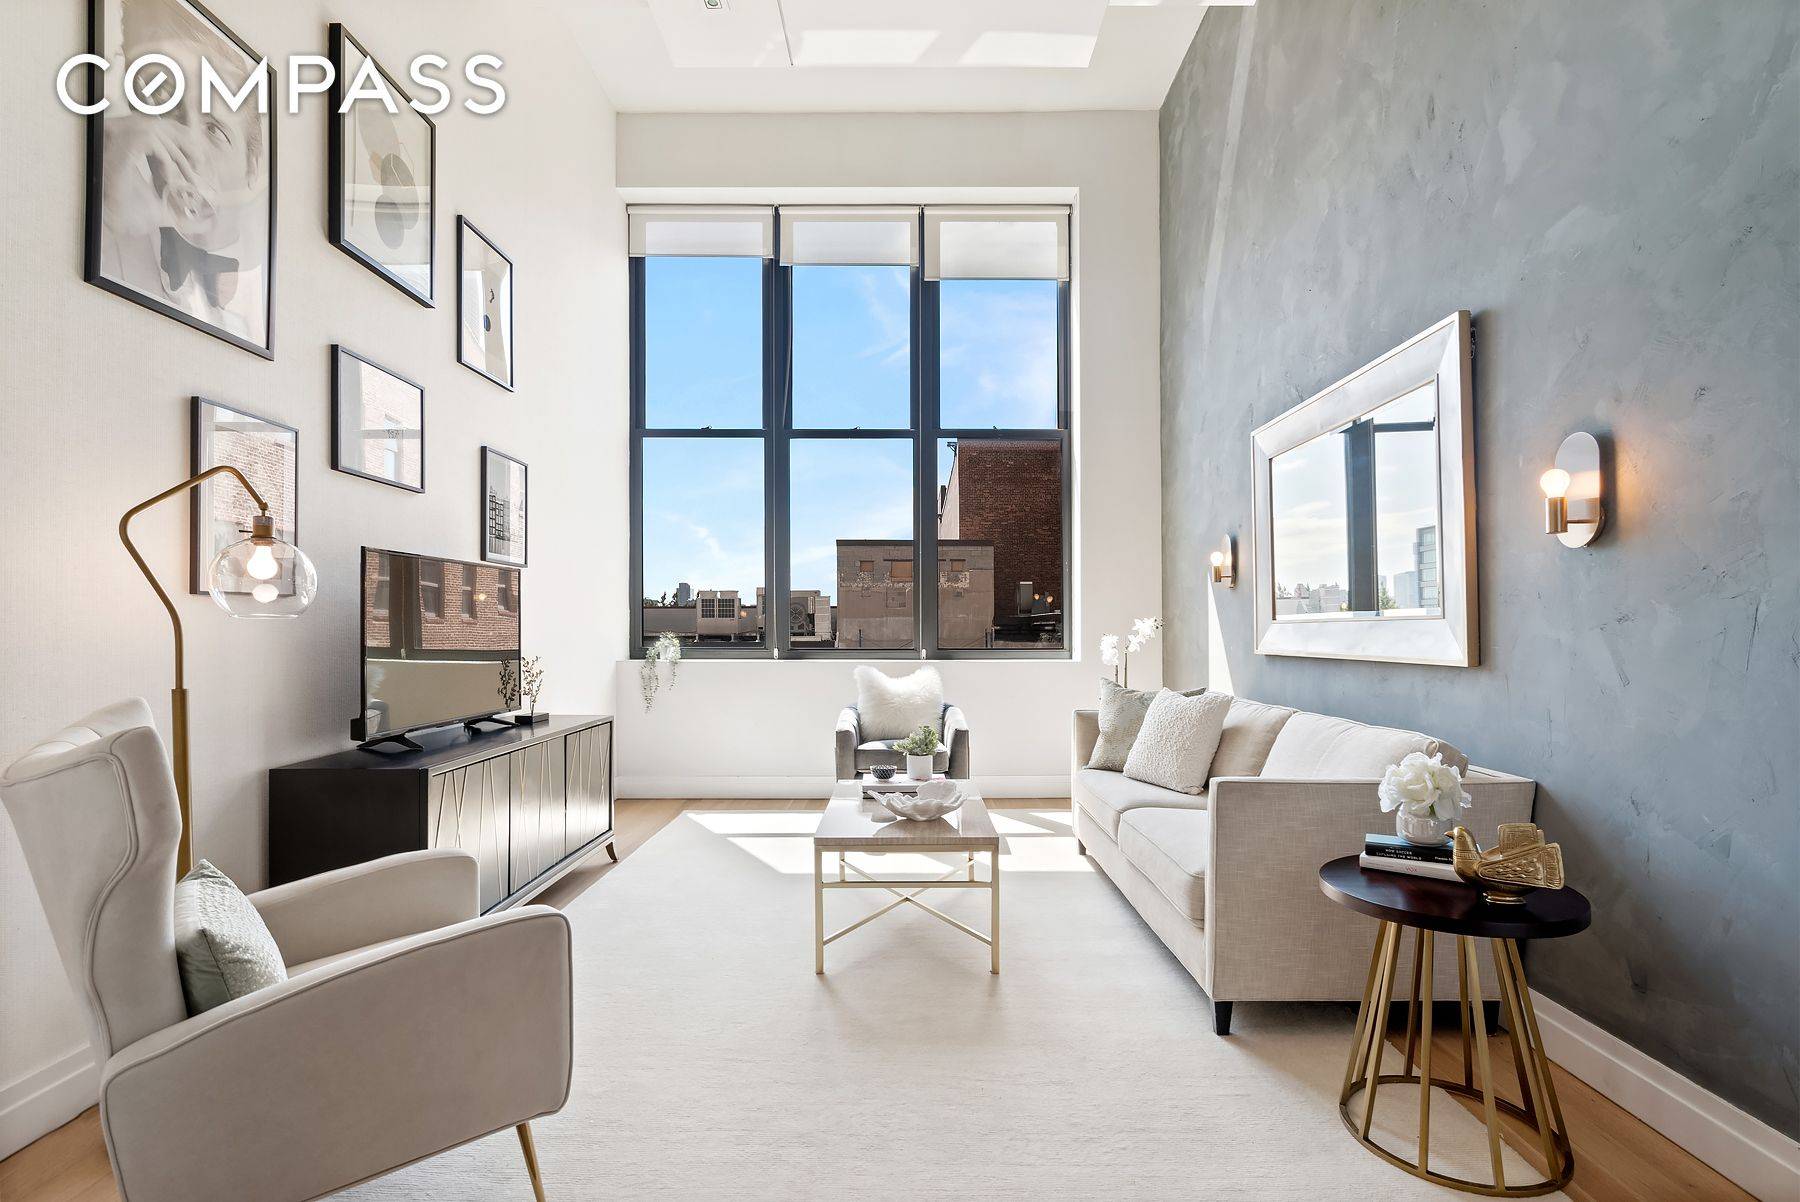 BACK ON THE MARKET ! Unique West Village Two Bedroom Two Baths Loft Duplex in the West Village 421 Hudson Street, 617 2, 995, 000 SHOWINGS AND OPEN HOUSES ARE ...